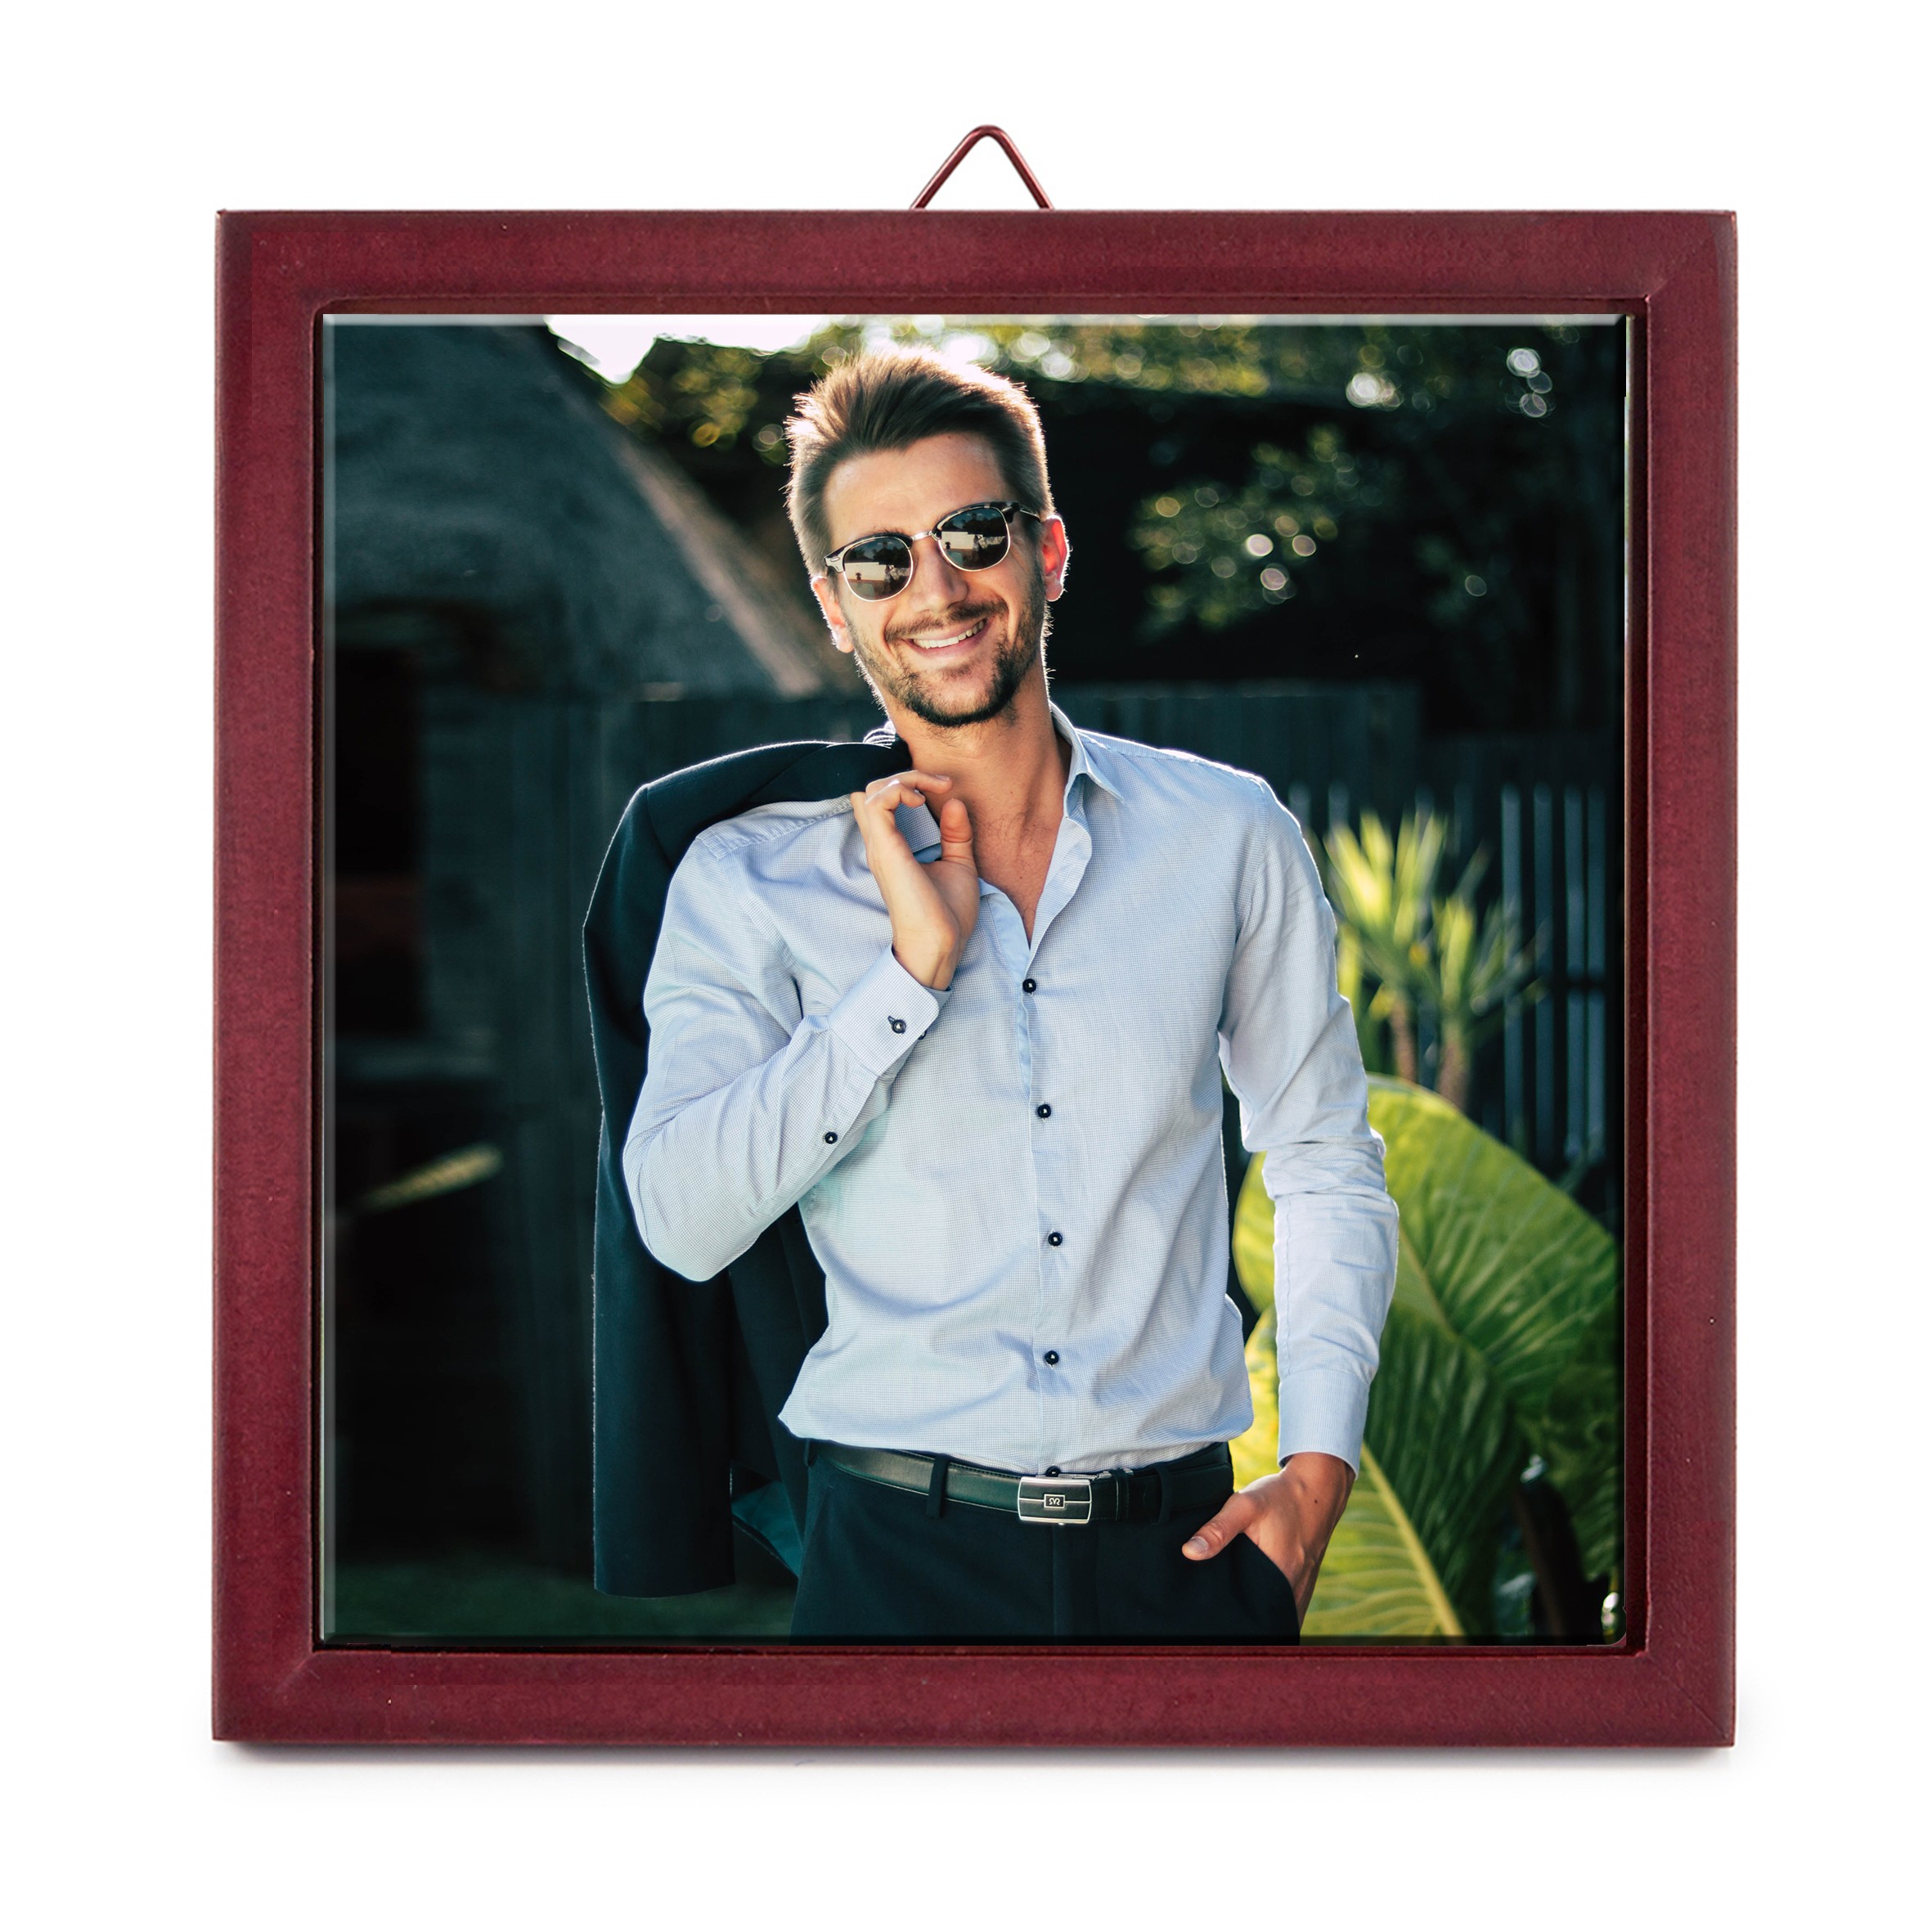 6'' x 6'' Personalized Photo Printed Ceramic Tile (with Wooden Frame)